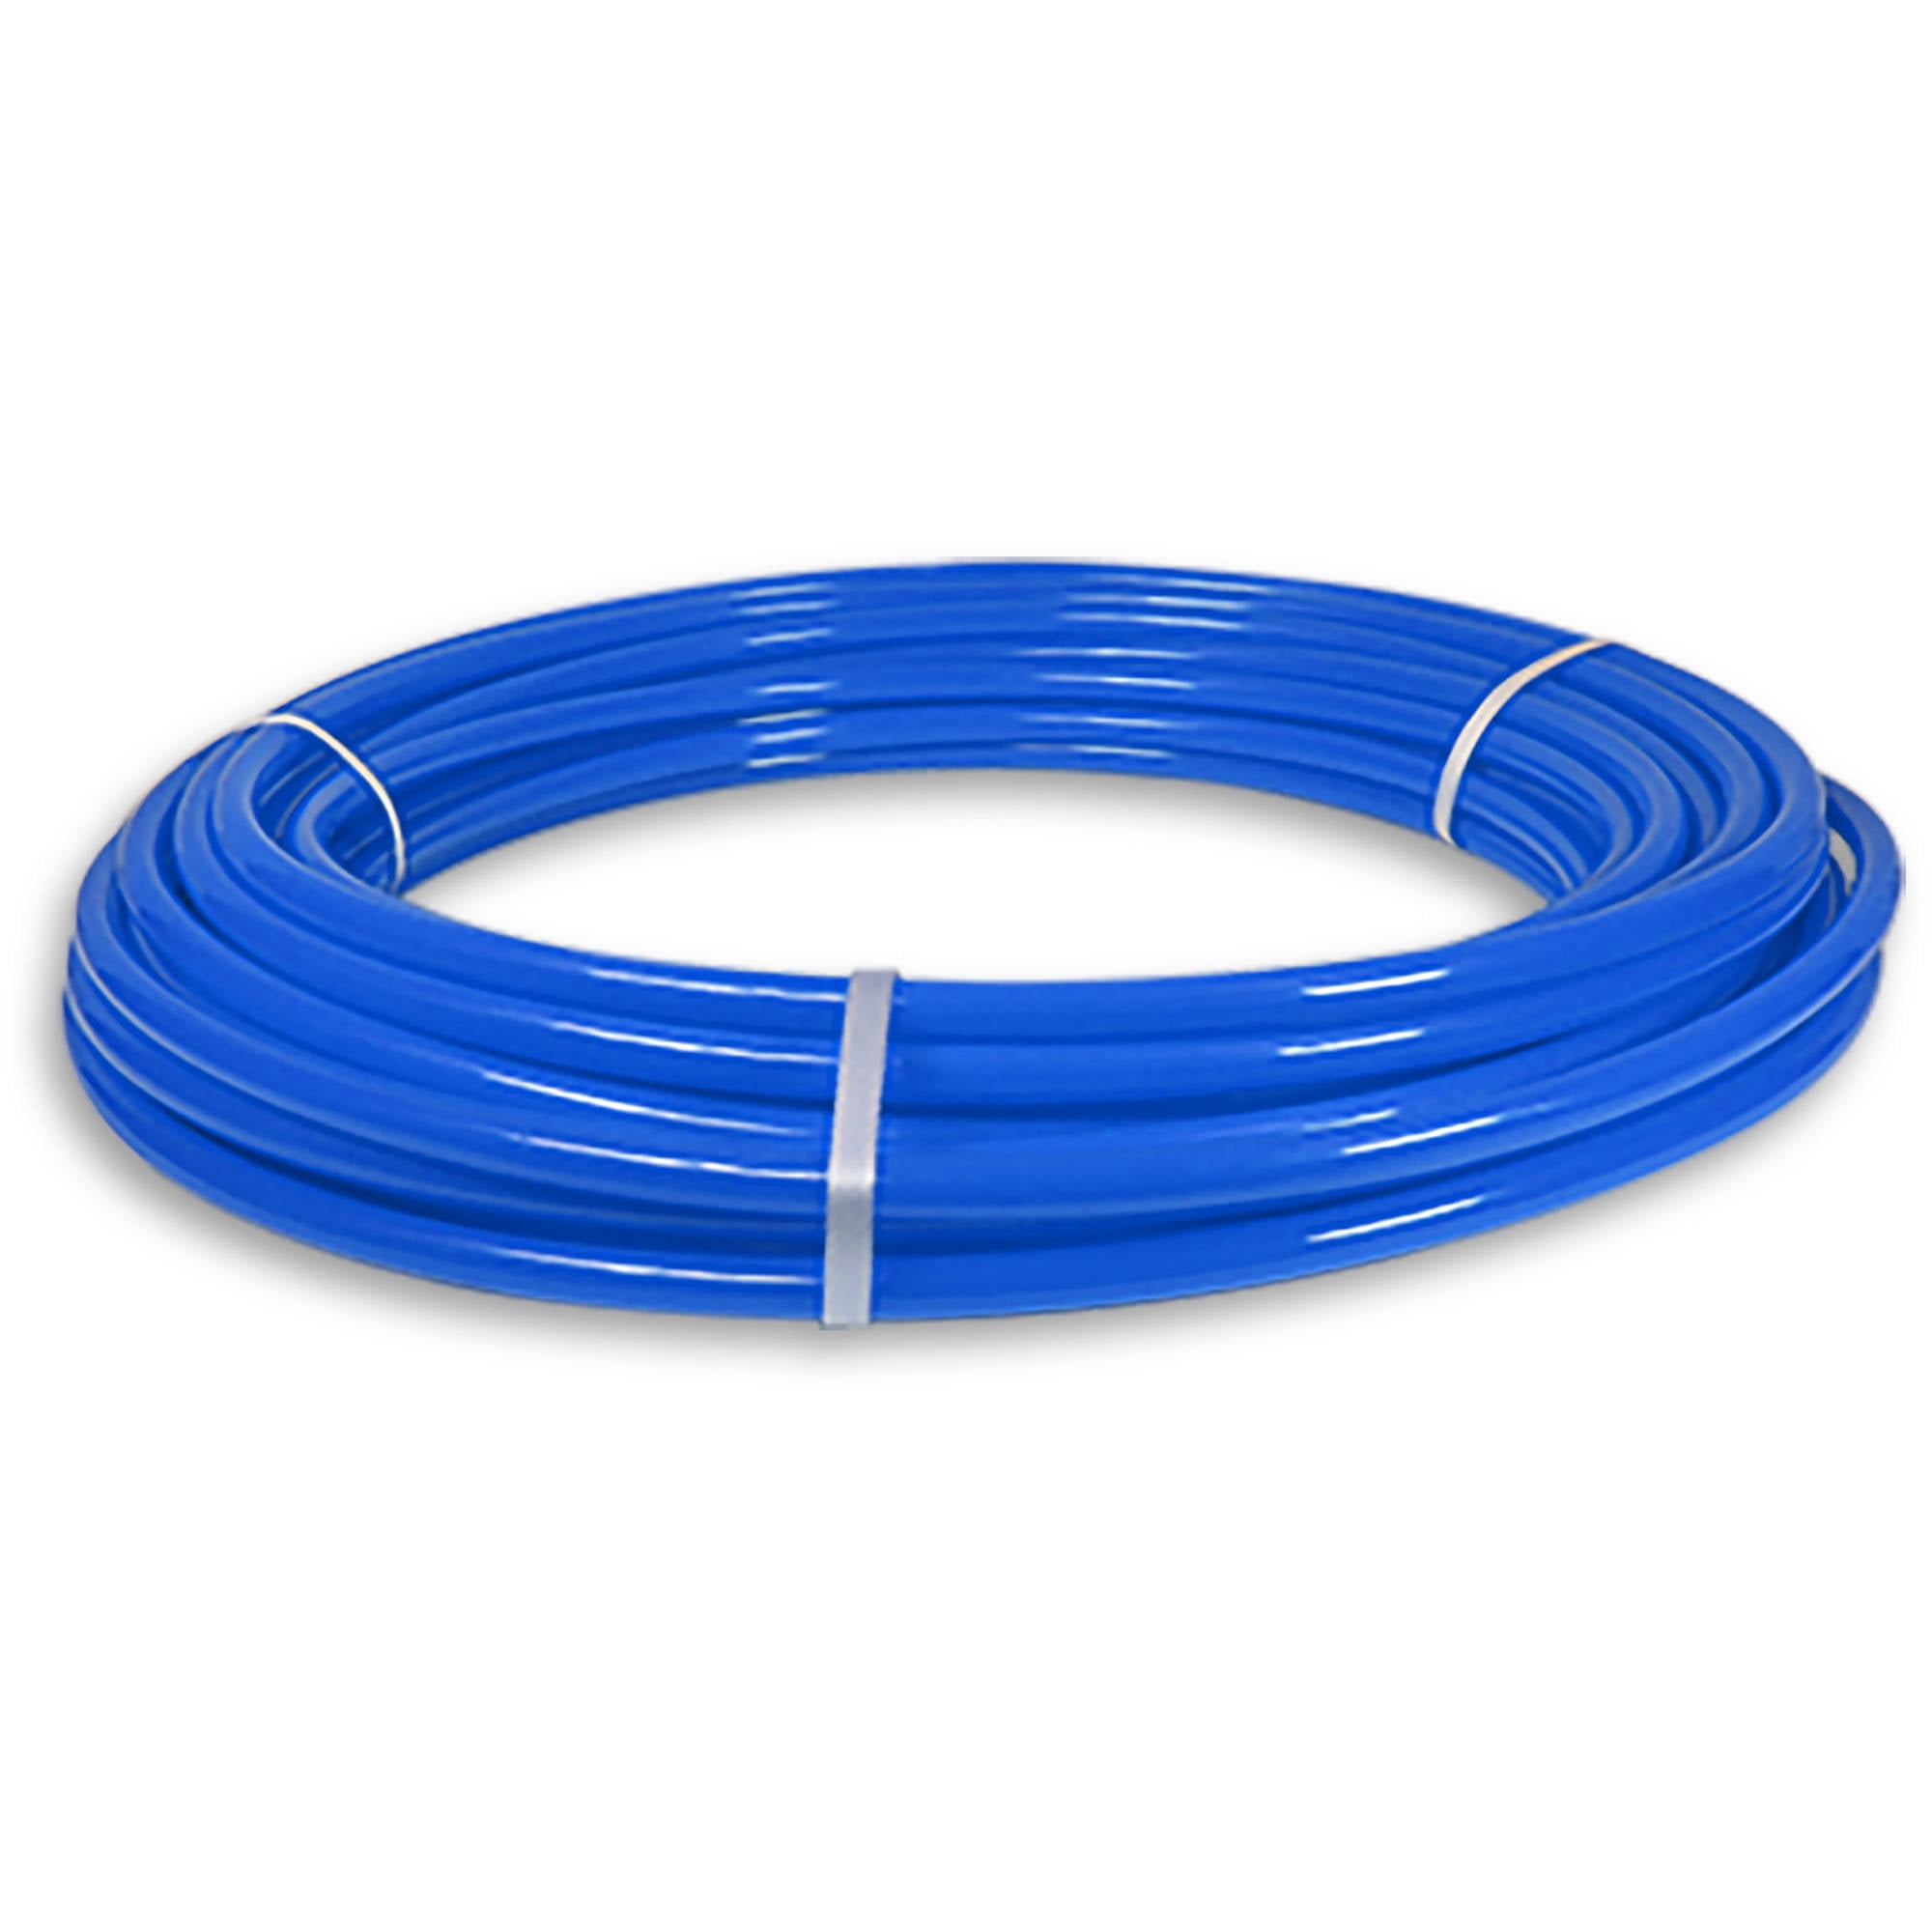 1/2in PEX Tubing 100ft Non Barrier Tube Coil Water Pipe Line Hose Plumbing Blue 